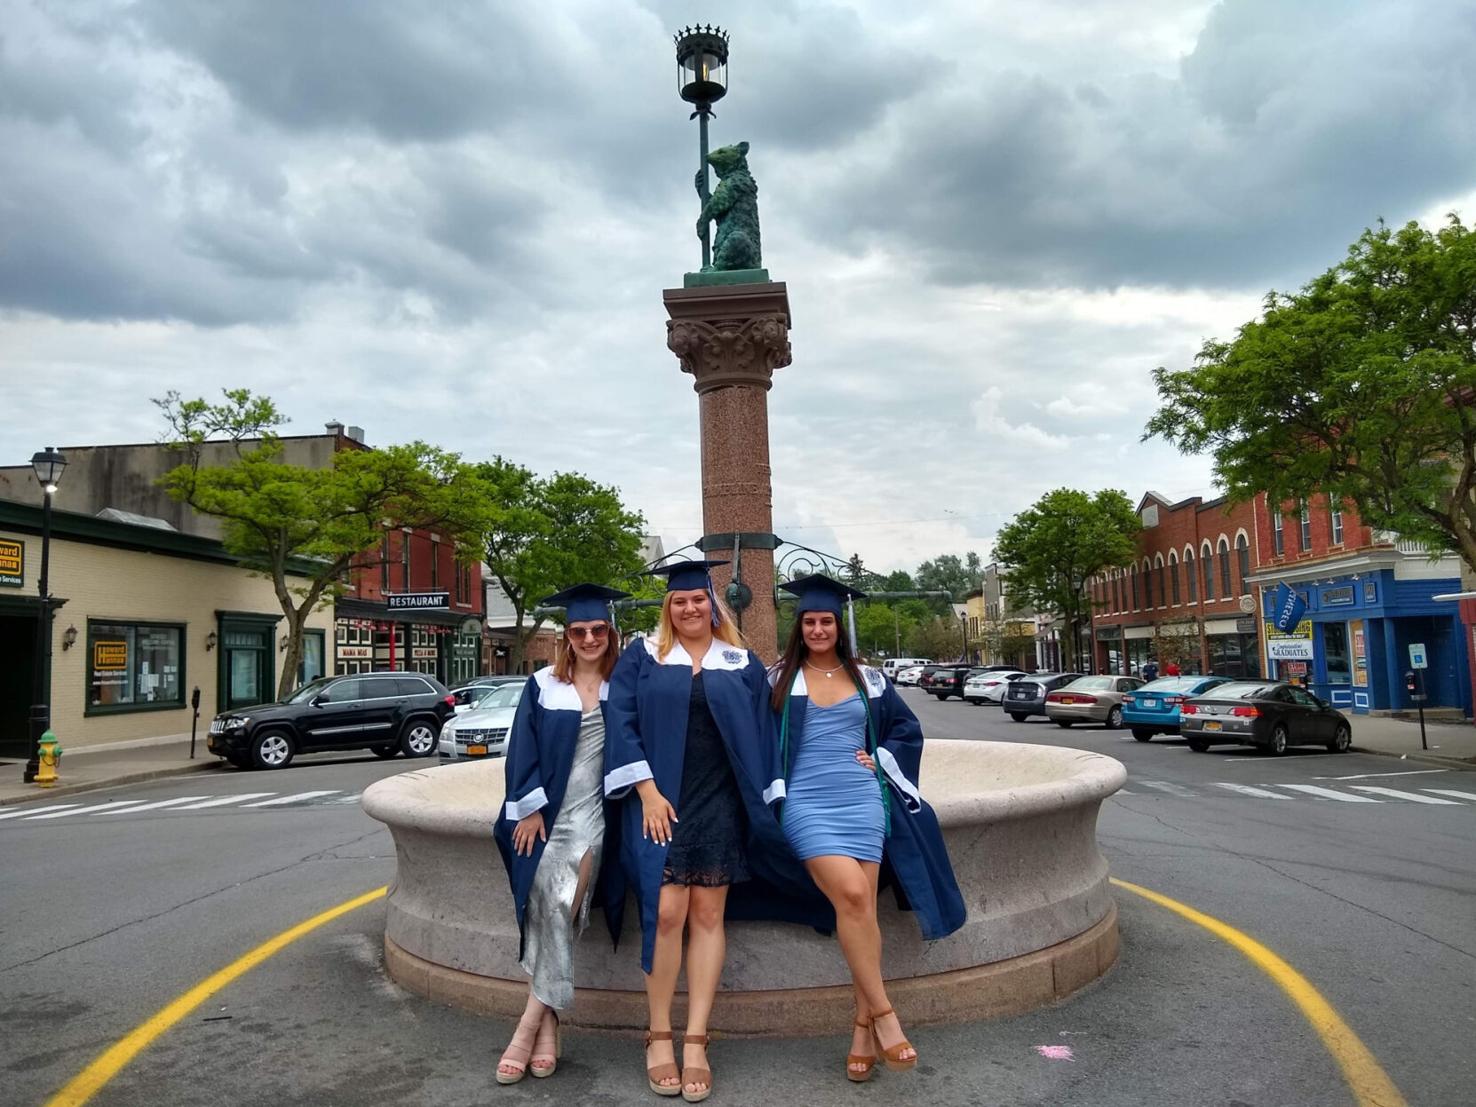 Commencement caps eventful year at SUNY Geneseo Local News